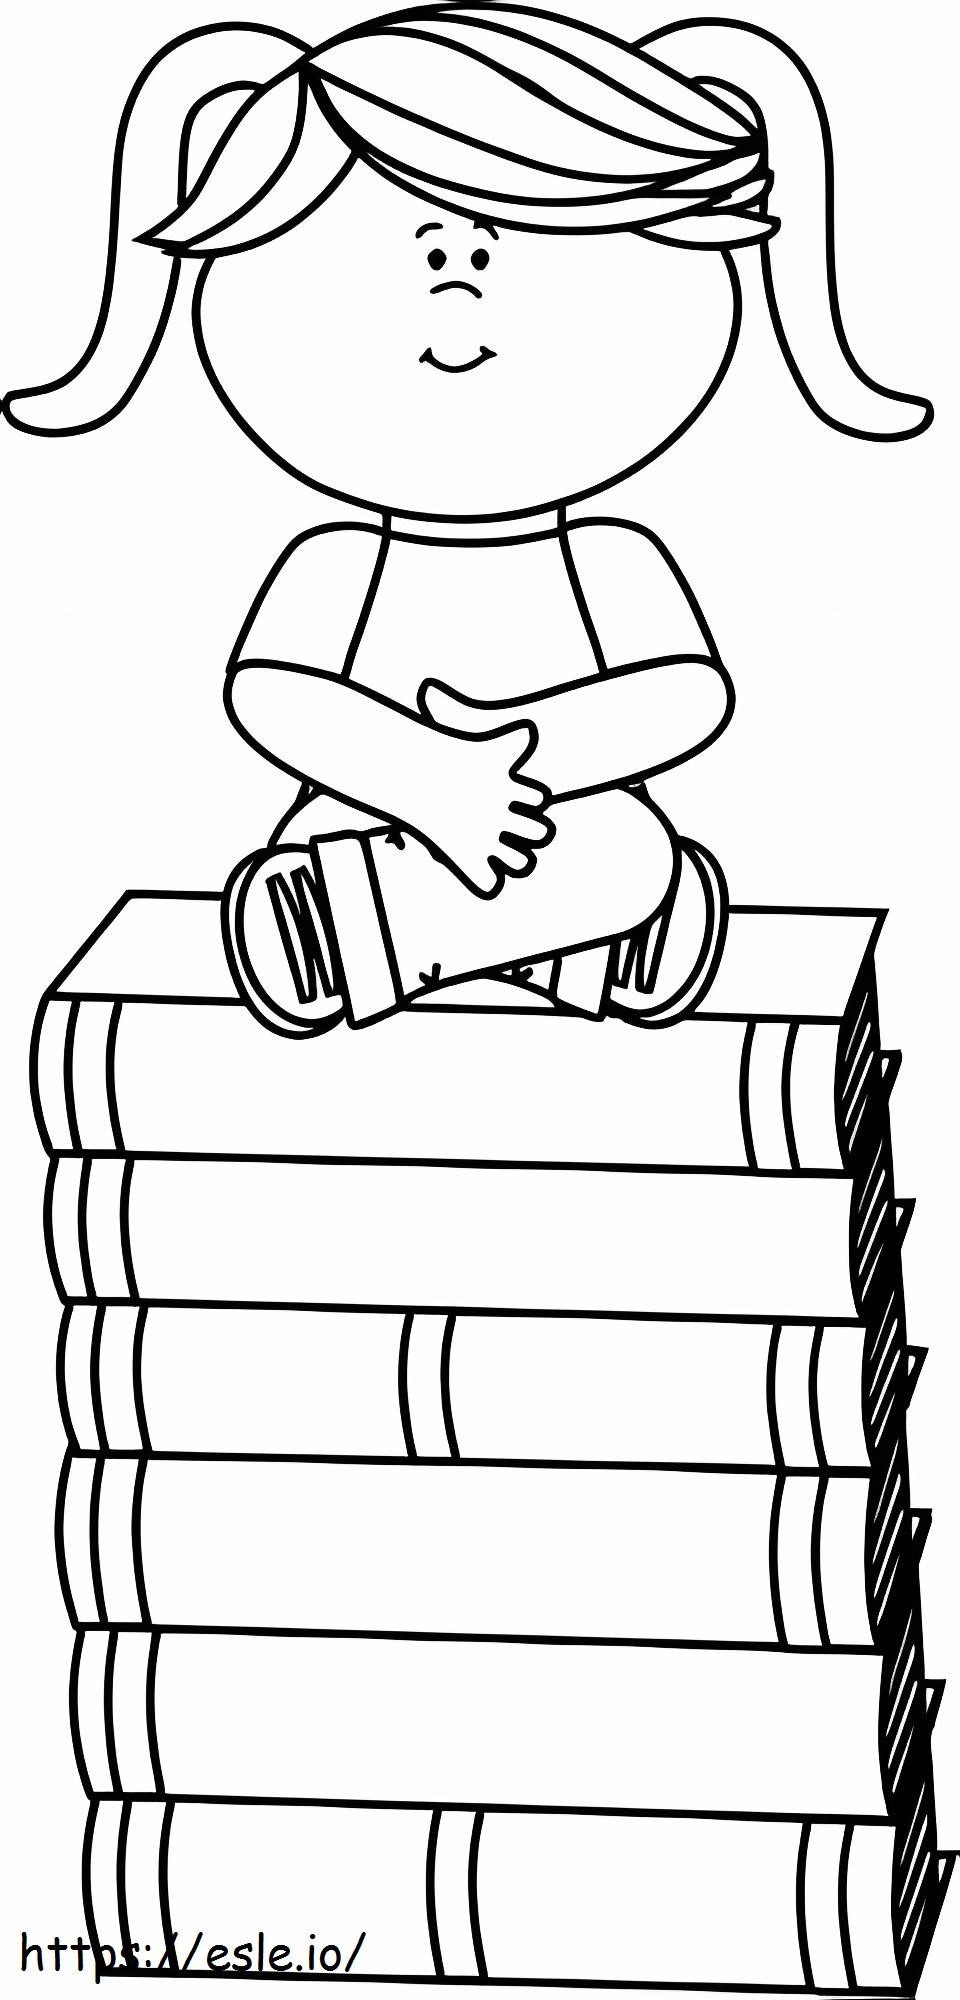 Girl Sitting On Books coloring page